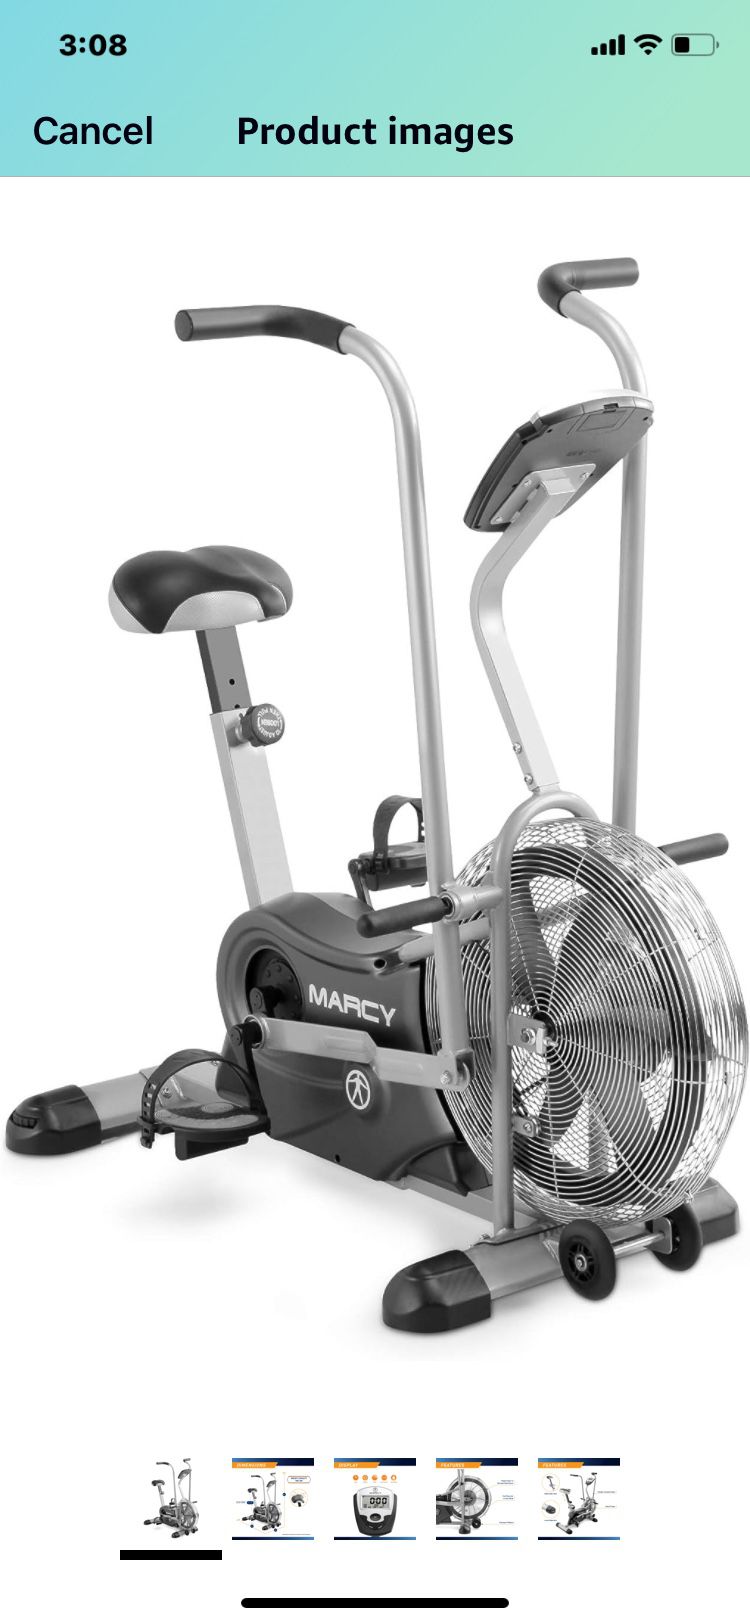 Marcy Air Resistance Exercise Fan Bike $250